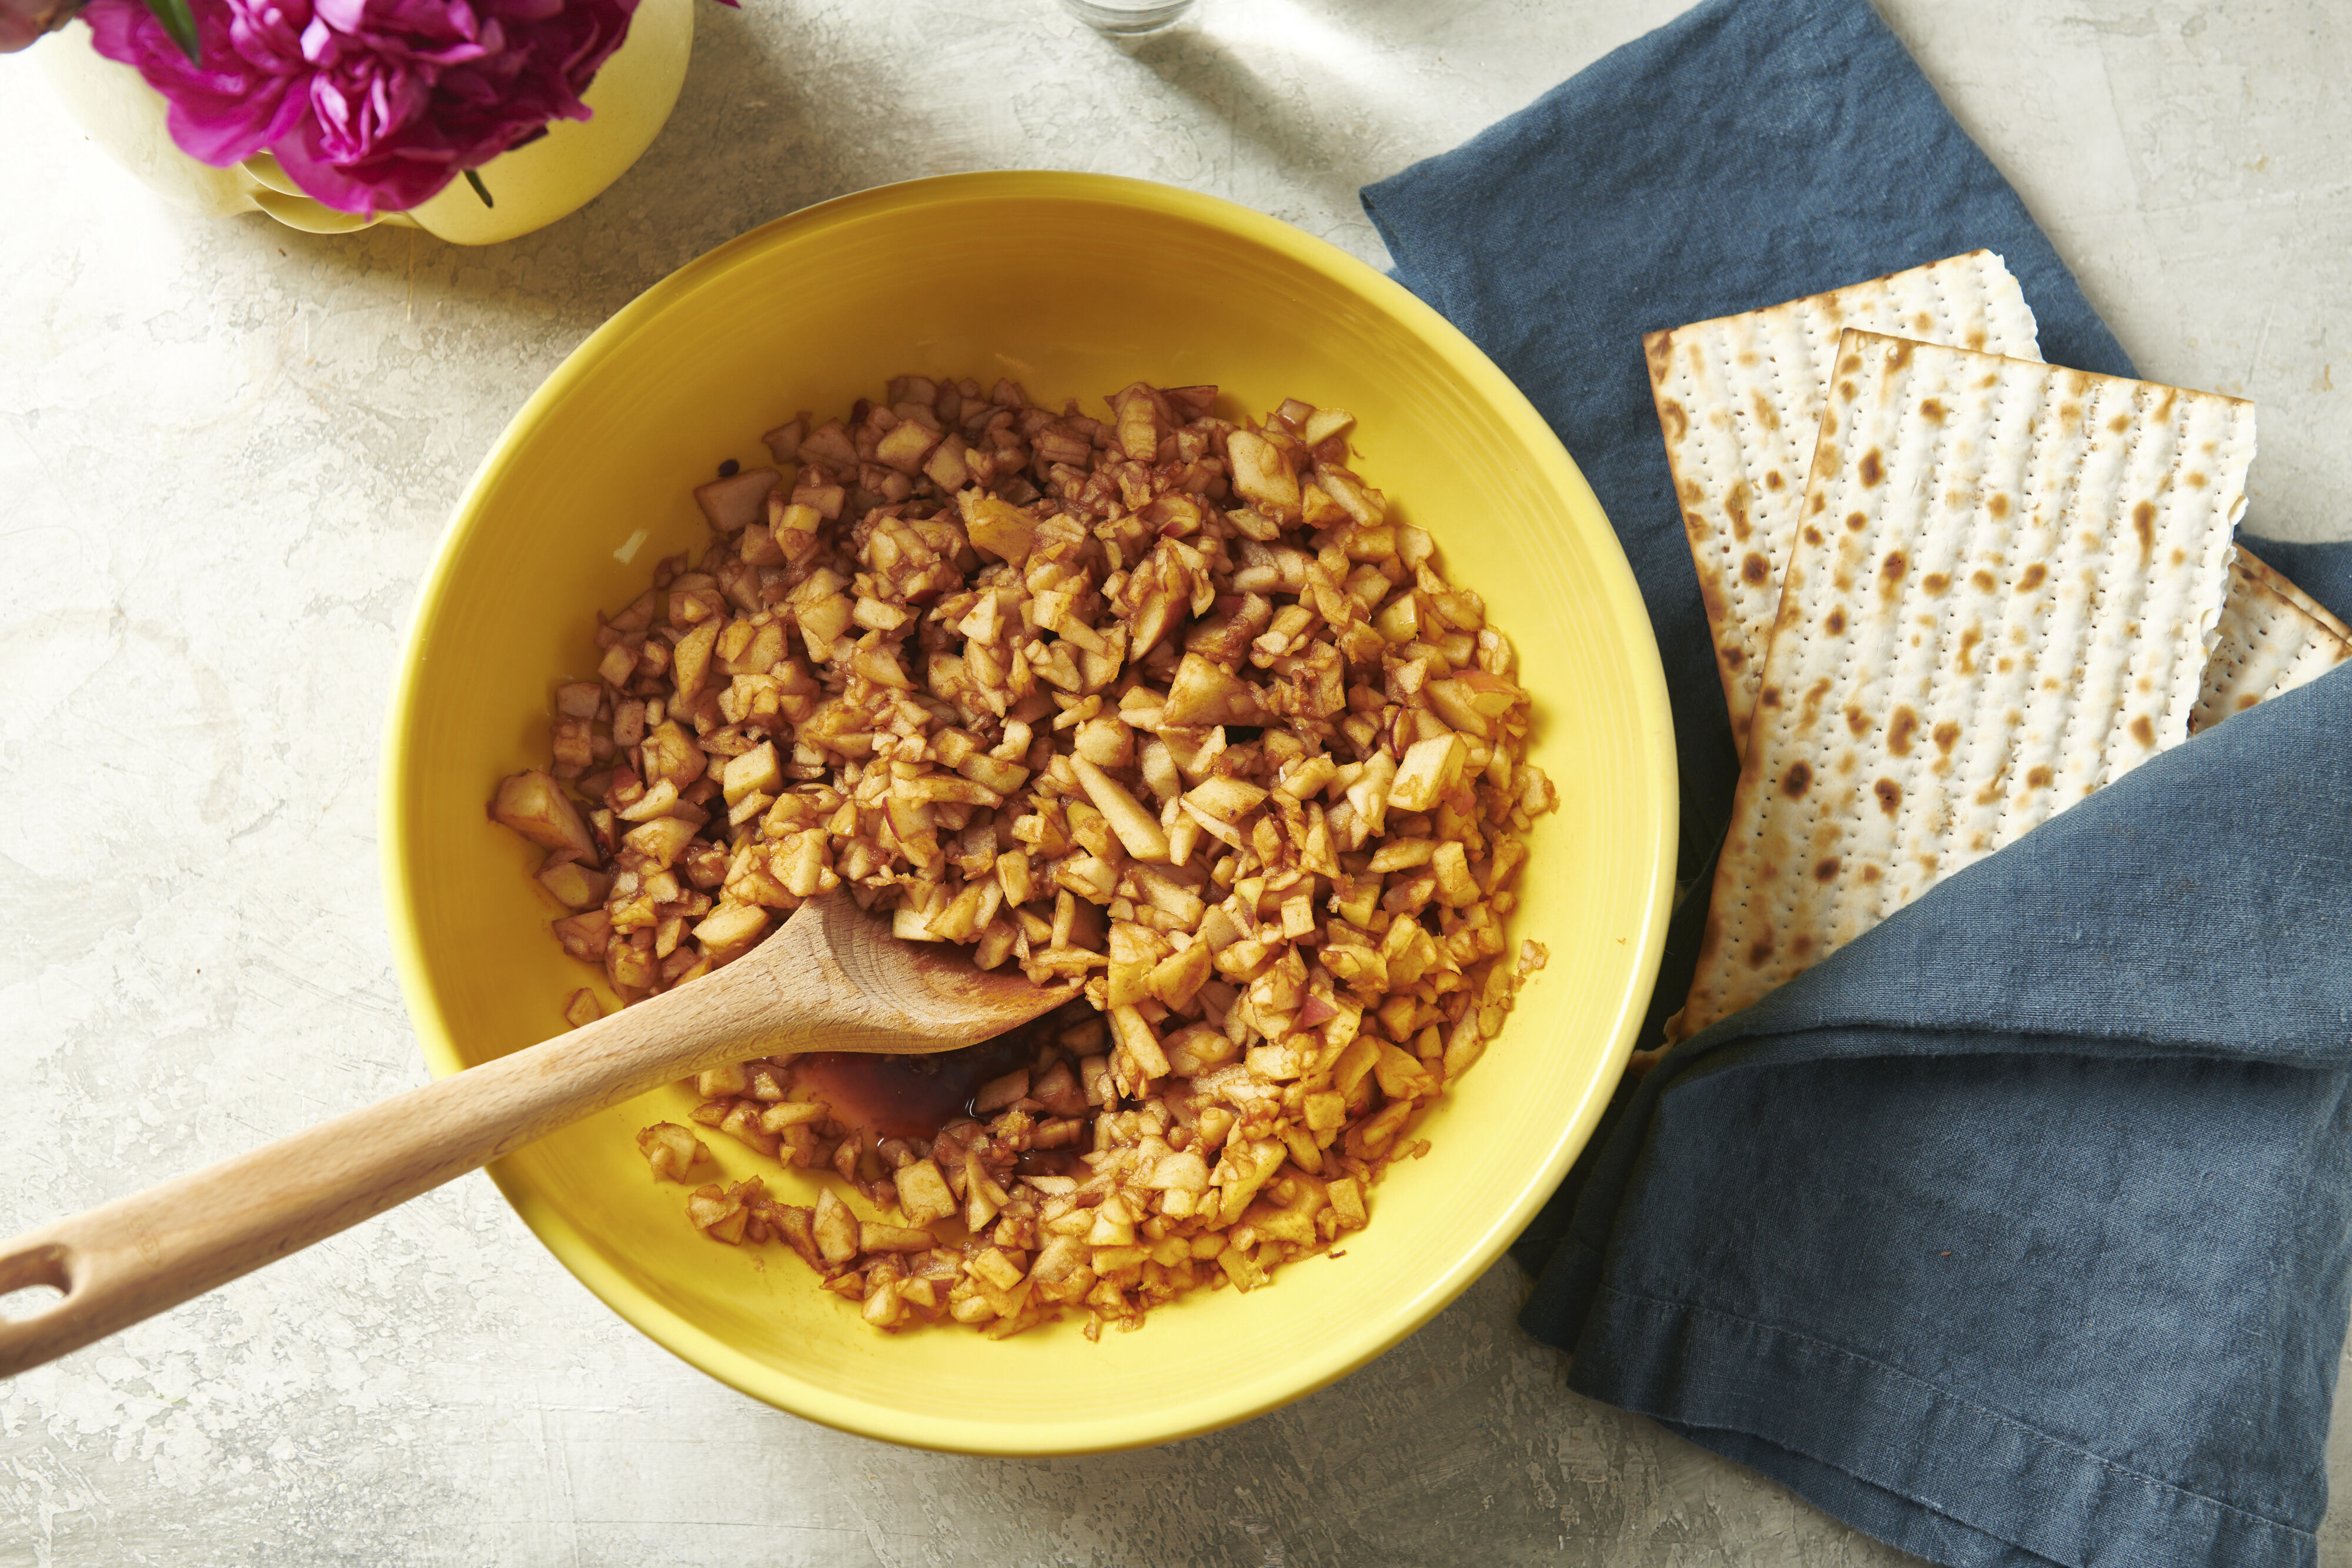 Apples, nuts, wine make a classic Passover charoset